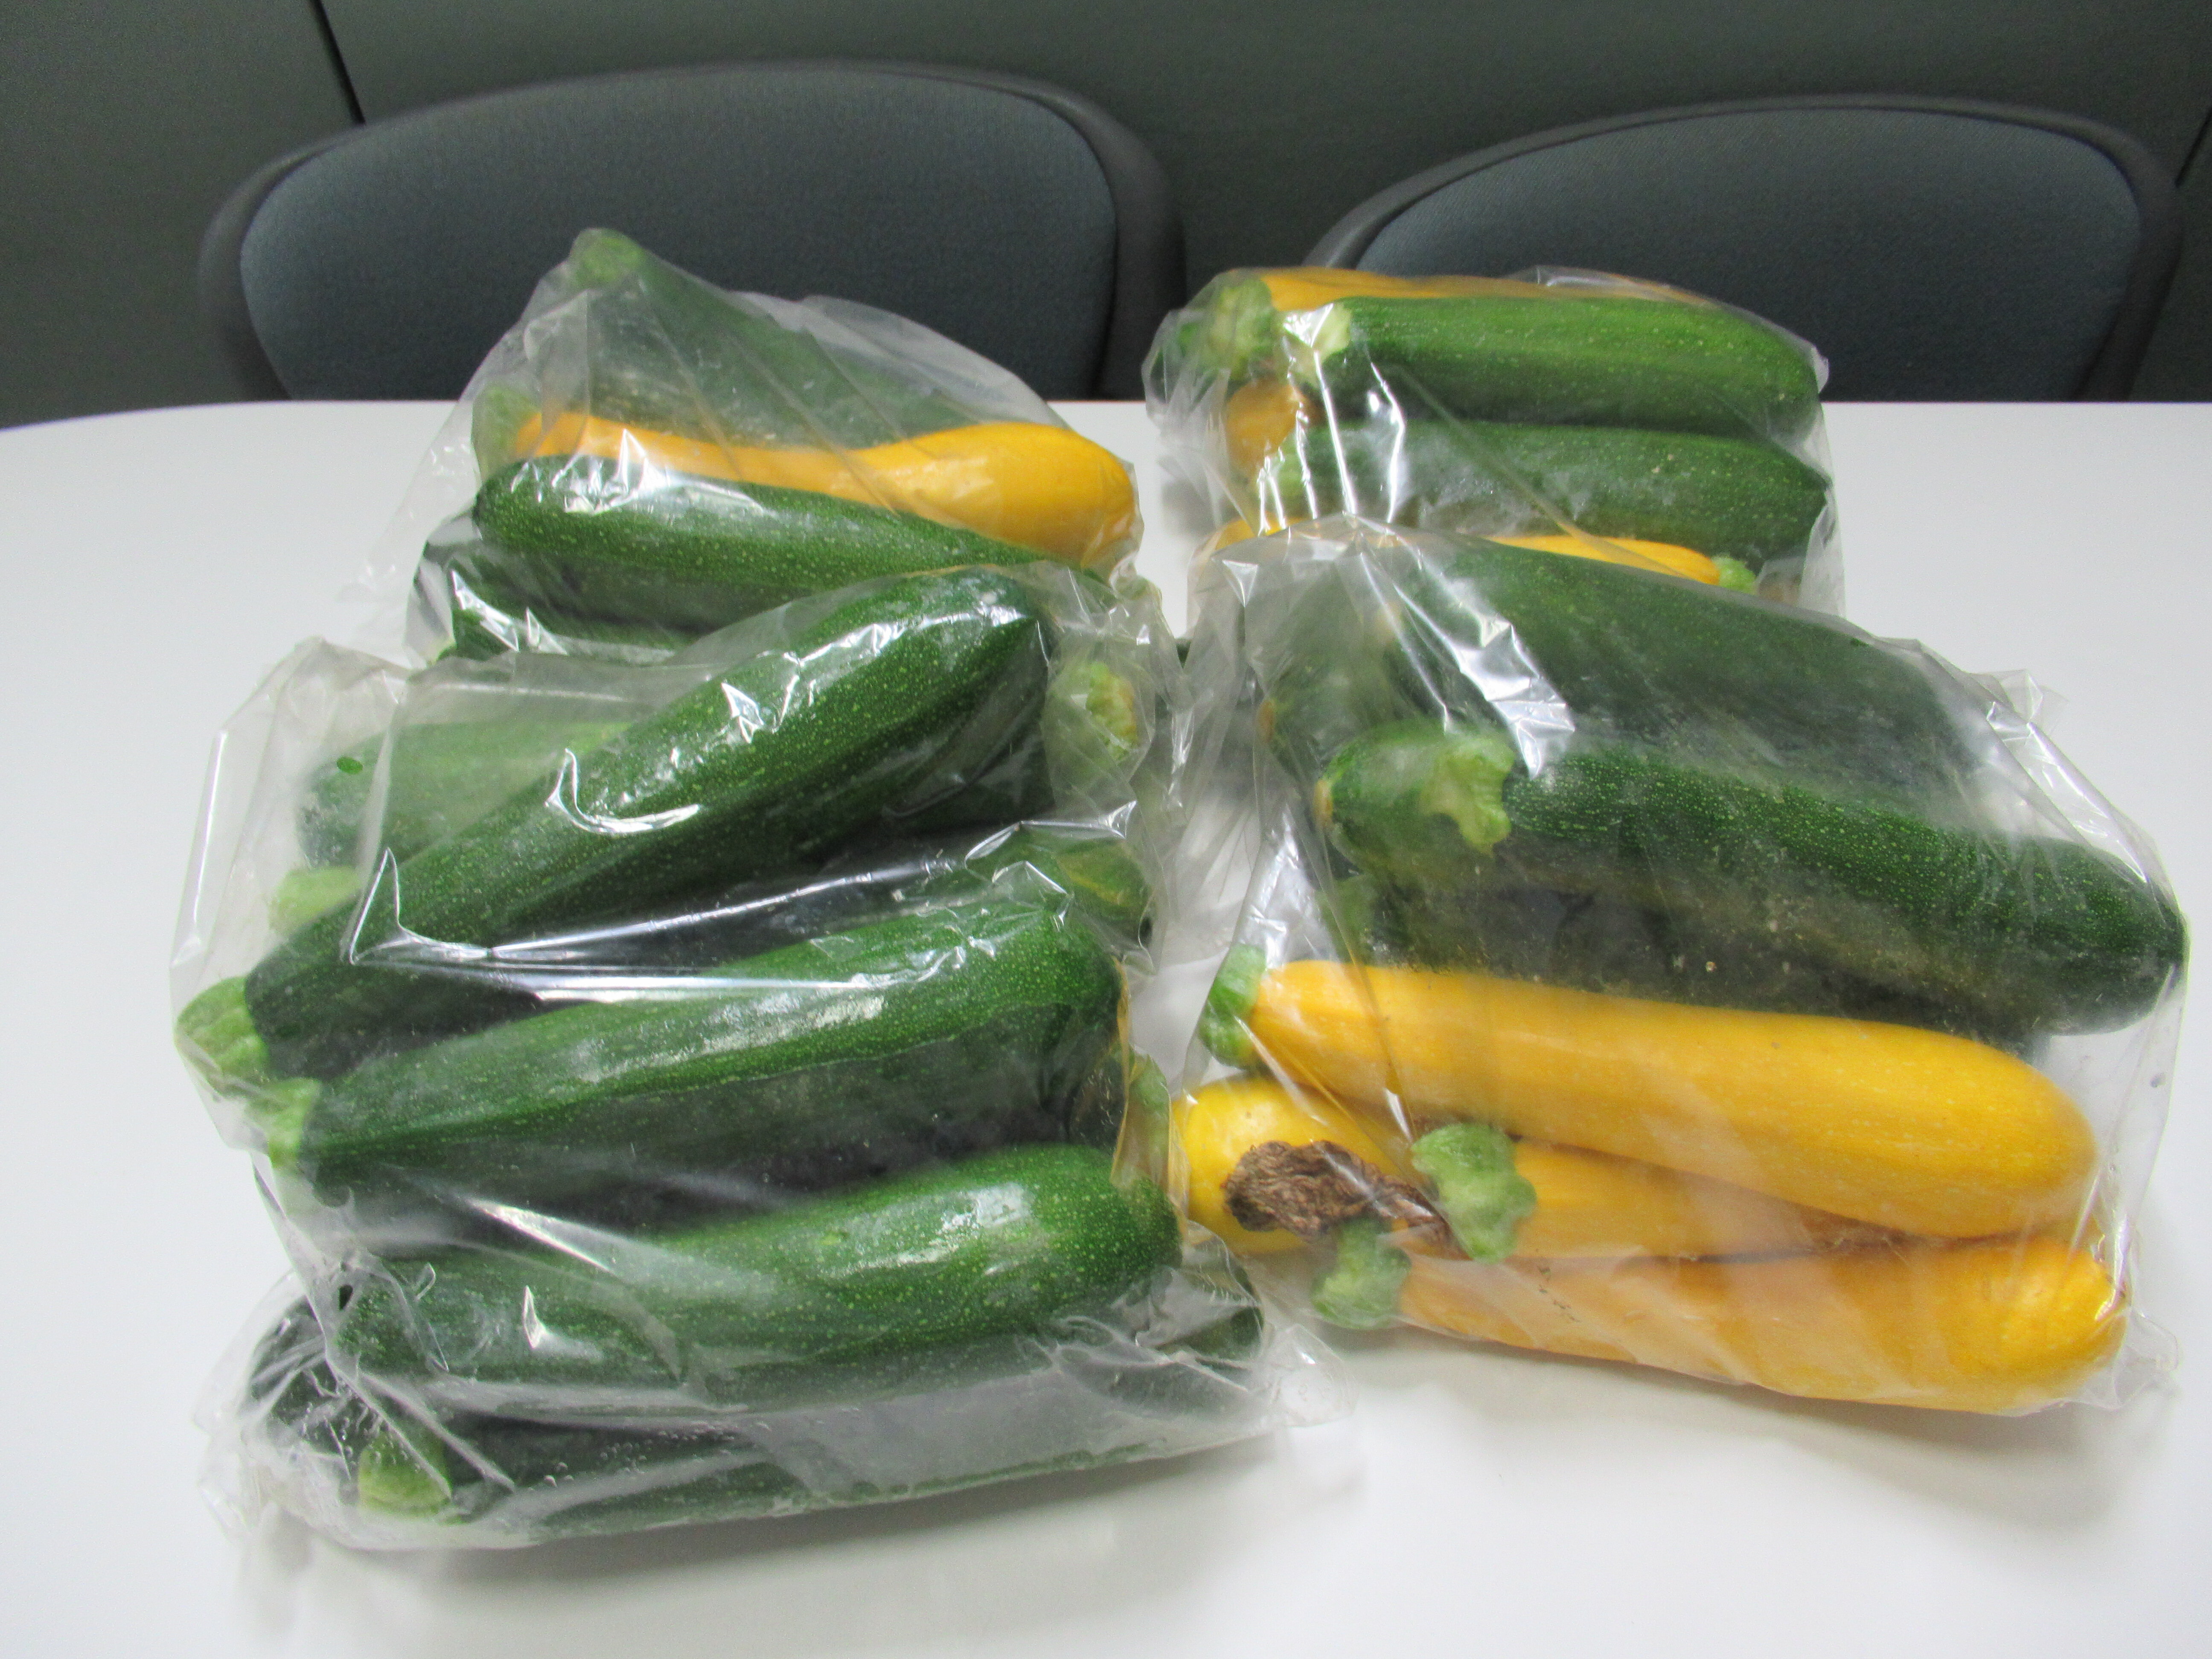 MS. Takahashi donated vegetables(Zucchini) to the international students